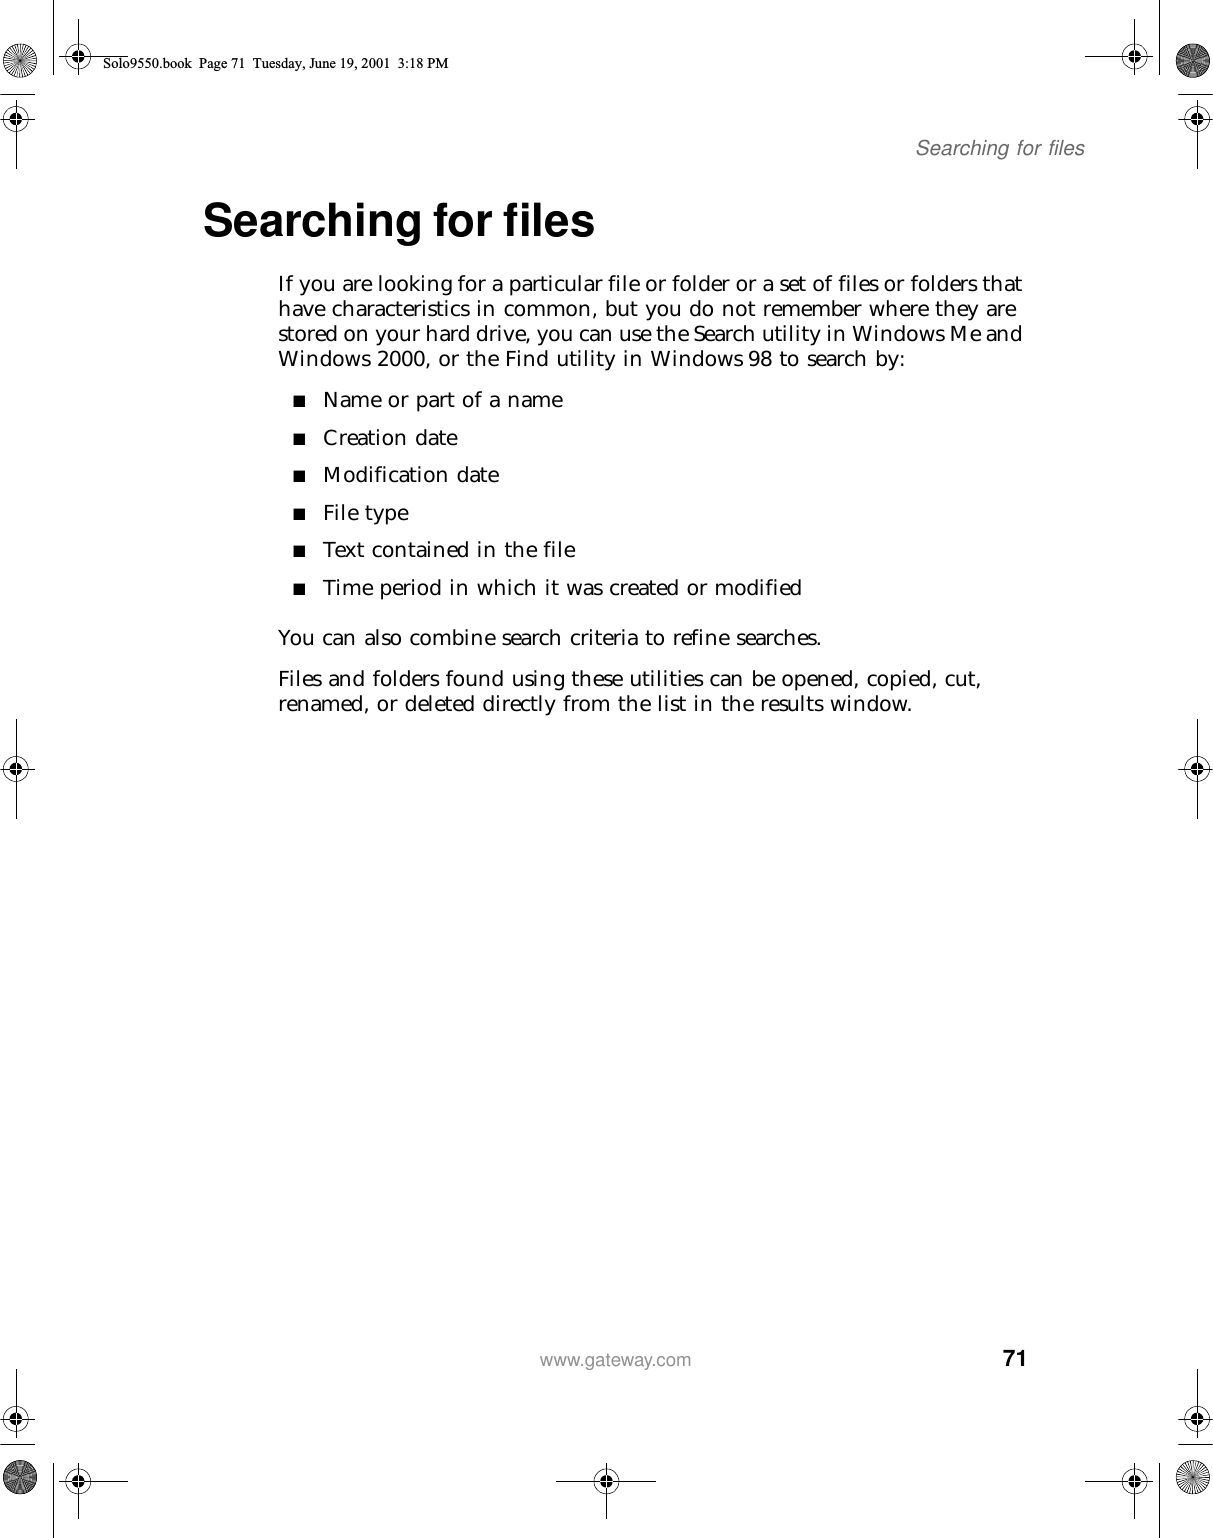 71Searching for fileswww.gateway.comSearching for filesIf you are looking for a particular file or folder or a set of files or folders that have characteristics in common, but you do not remember where they are stored on your hard drive, you can use the Search utility in Windows Me and Windows 2000, or the Find utility in Windows 98 to search by:■Name or part of a name■Creation date■Modification date■File type■Text contained in the file■Time period in which it was created or modifiedYou can also combine search criteria to refine searches.Files and folders found using these utilities can be opened, copied, cut, renamed, or deleted directly from the list in the results window.Solo9550.book Page 71 Tuesday, June 19, 2001 3:18 PM